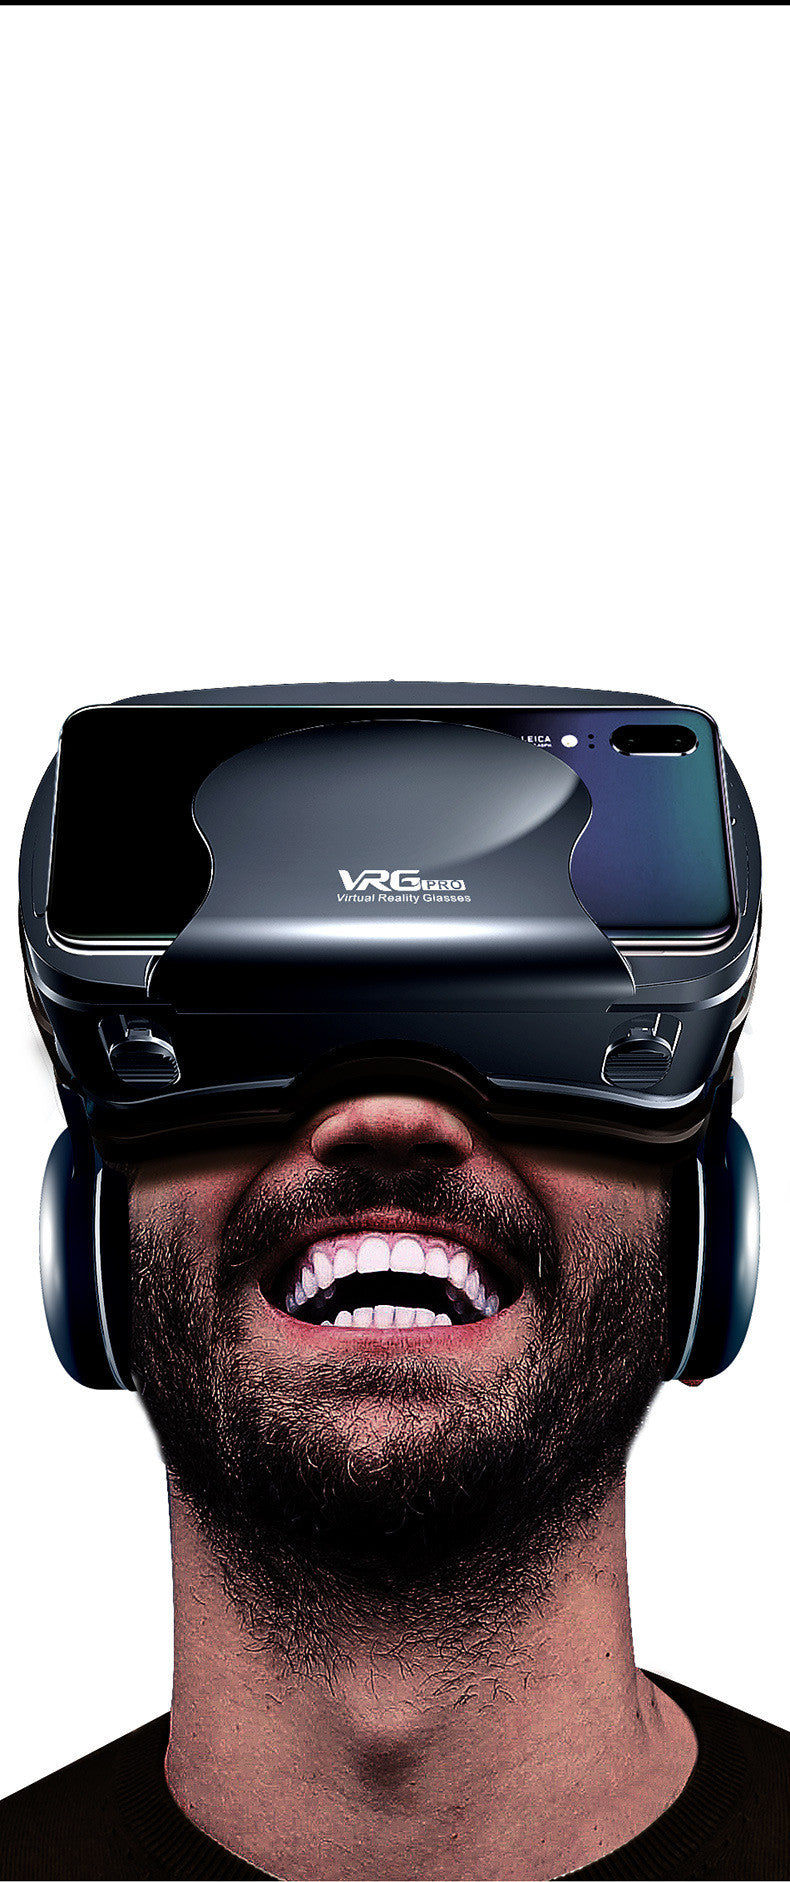 All-in-one Mobile Phone 3D Cinema Gift New VR glasses